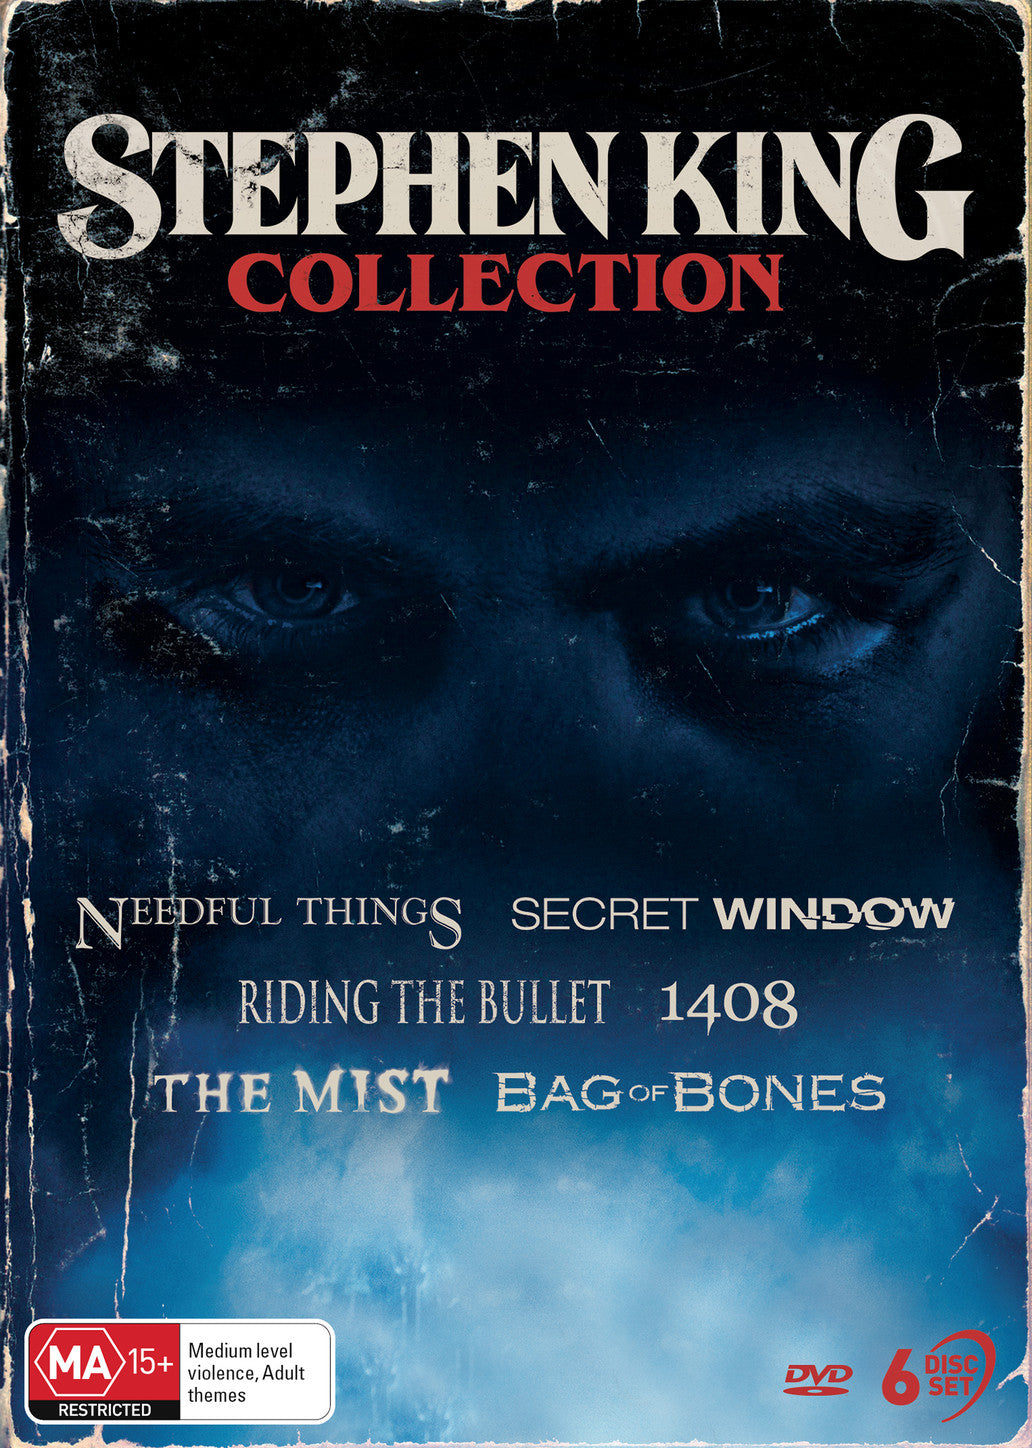 STEPHEN KING COLLECTION - DVD